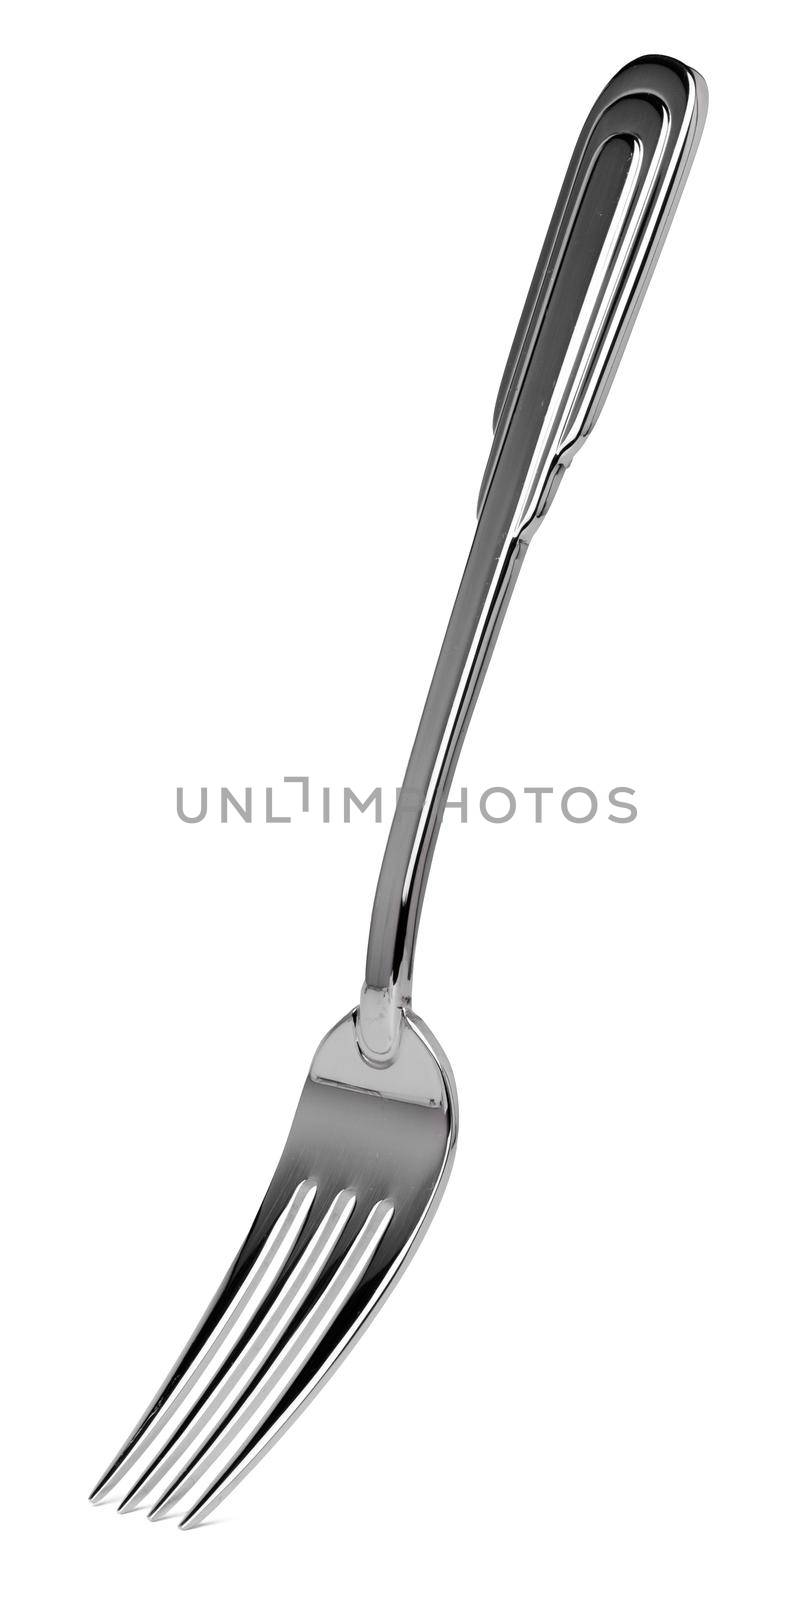 Steel metal fork isolated on white background by Fabrikasimf